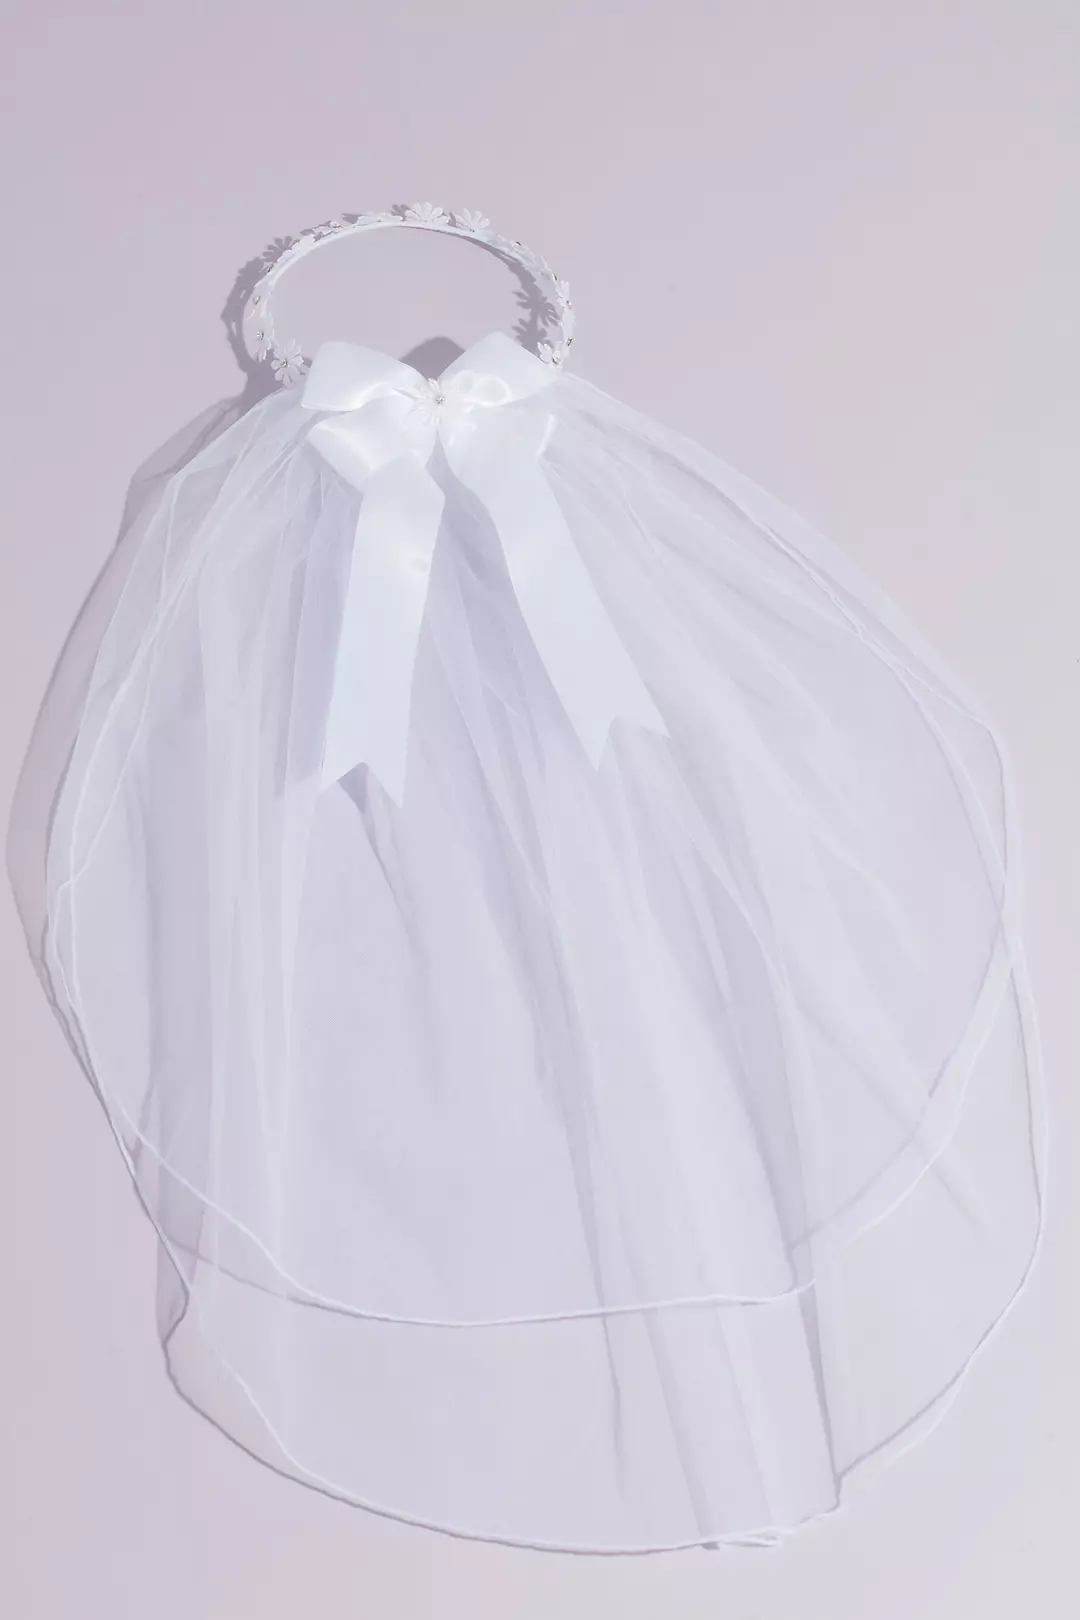 Daisy Chain Two Tier Communion Veil with Bow Image